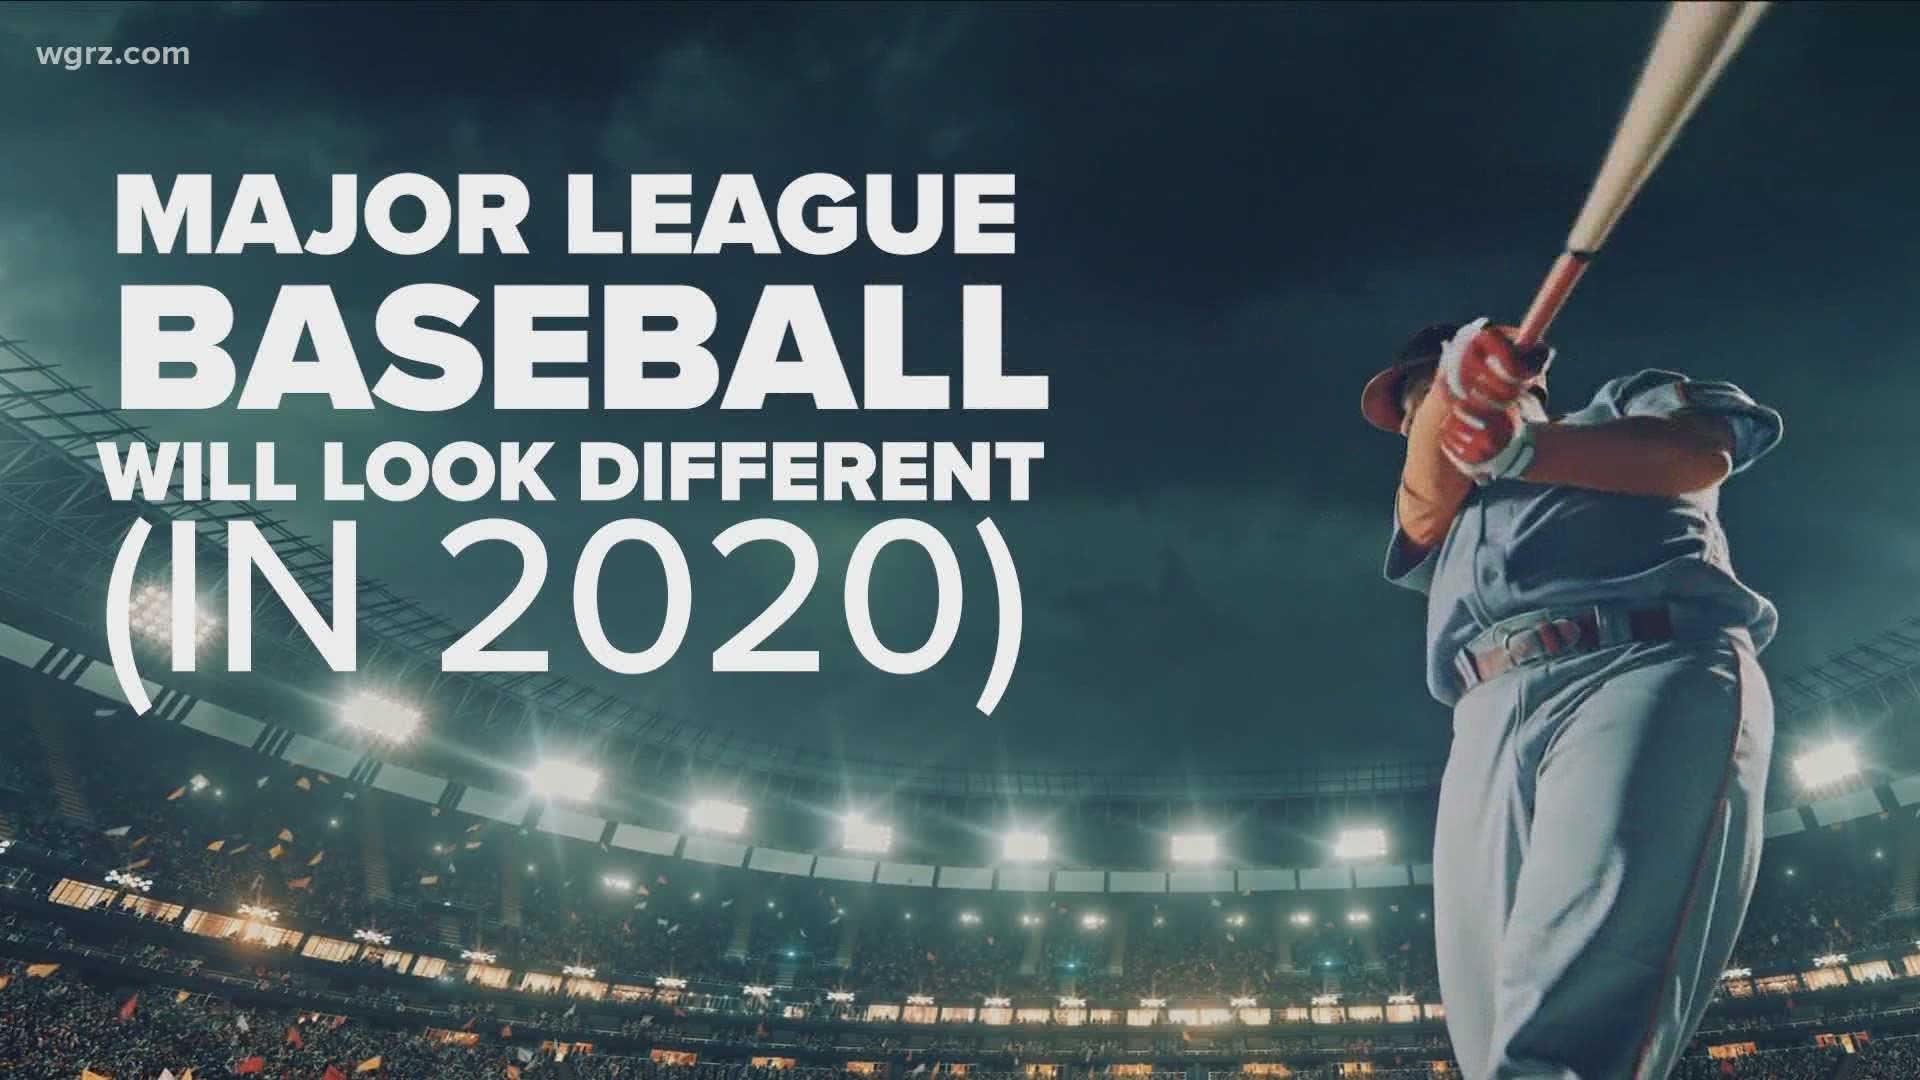 With MLB back in Buffalo we take a look at what is different  with baseball in 2020